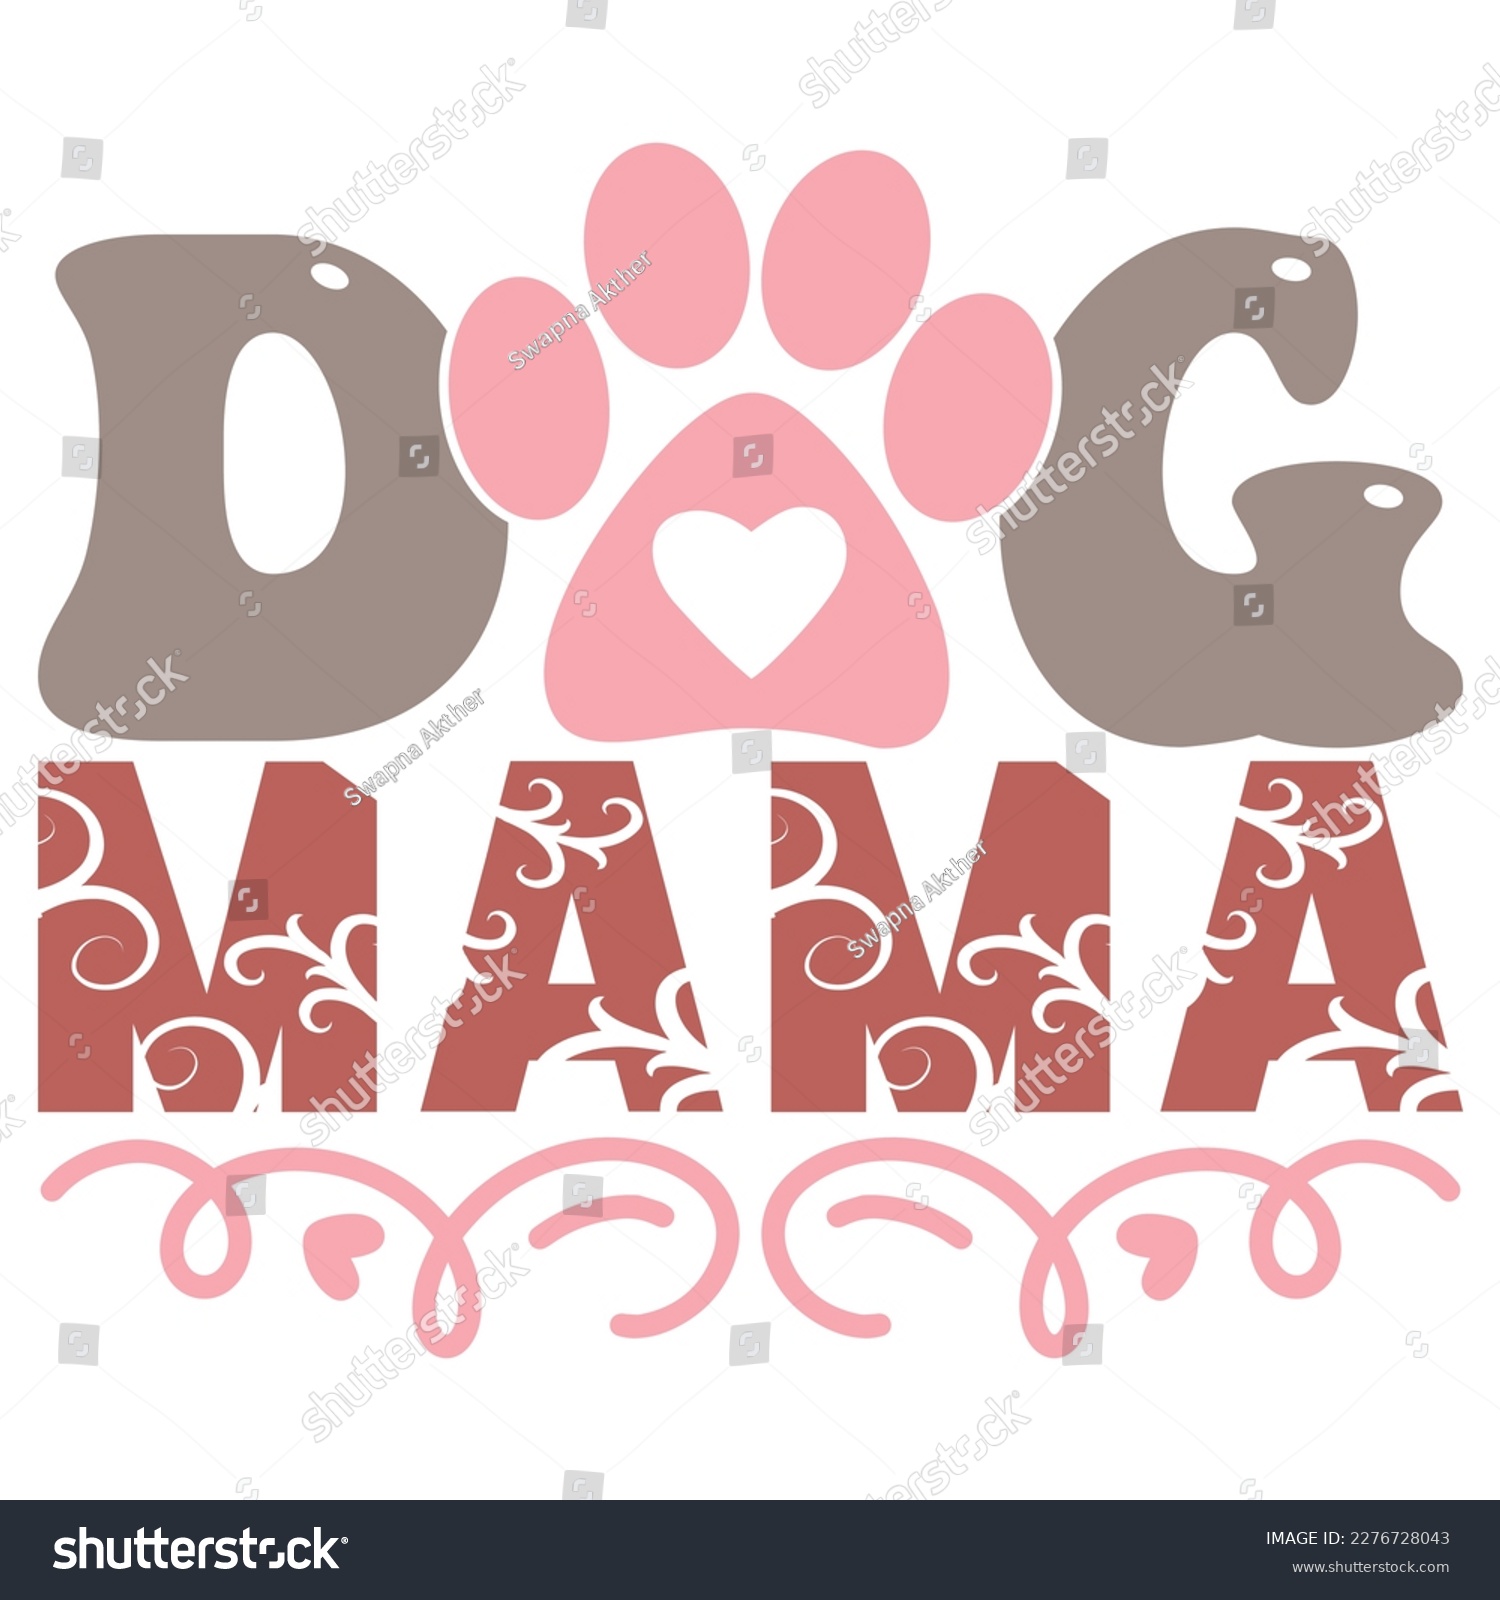 SVG of Dog Mama - Boho Retro Style Dog T-shirt And SVG Design. Dog SVG Quotes T shirt Design, Vector EPS Editable Files, Can You Download This File. svg